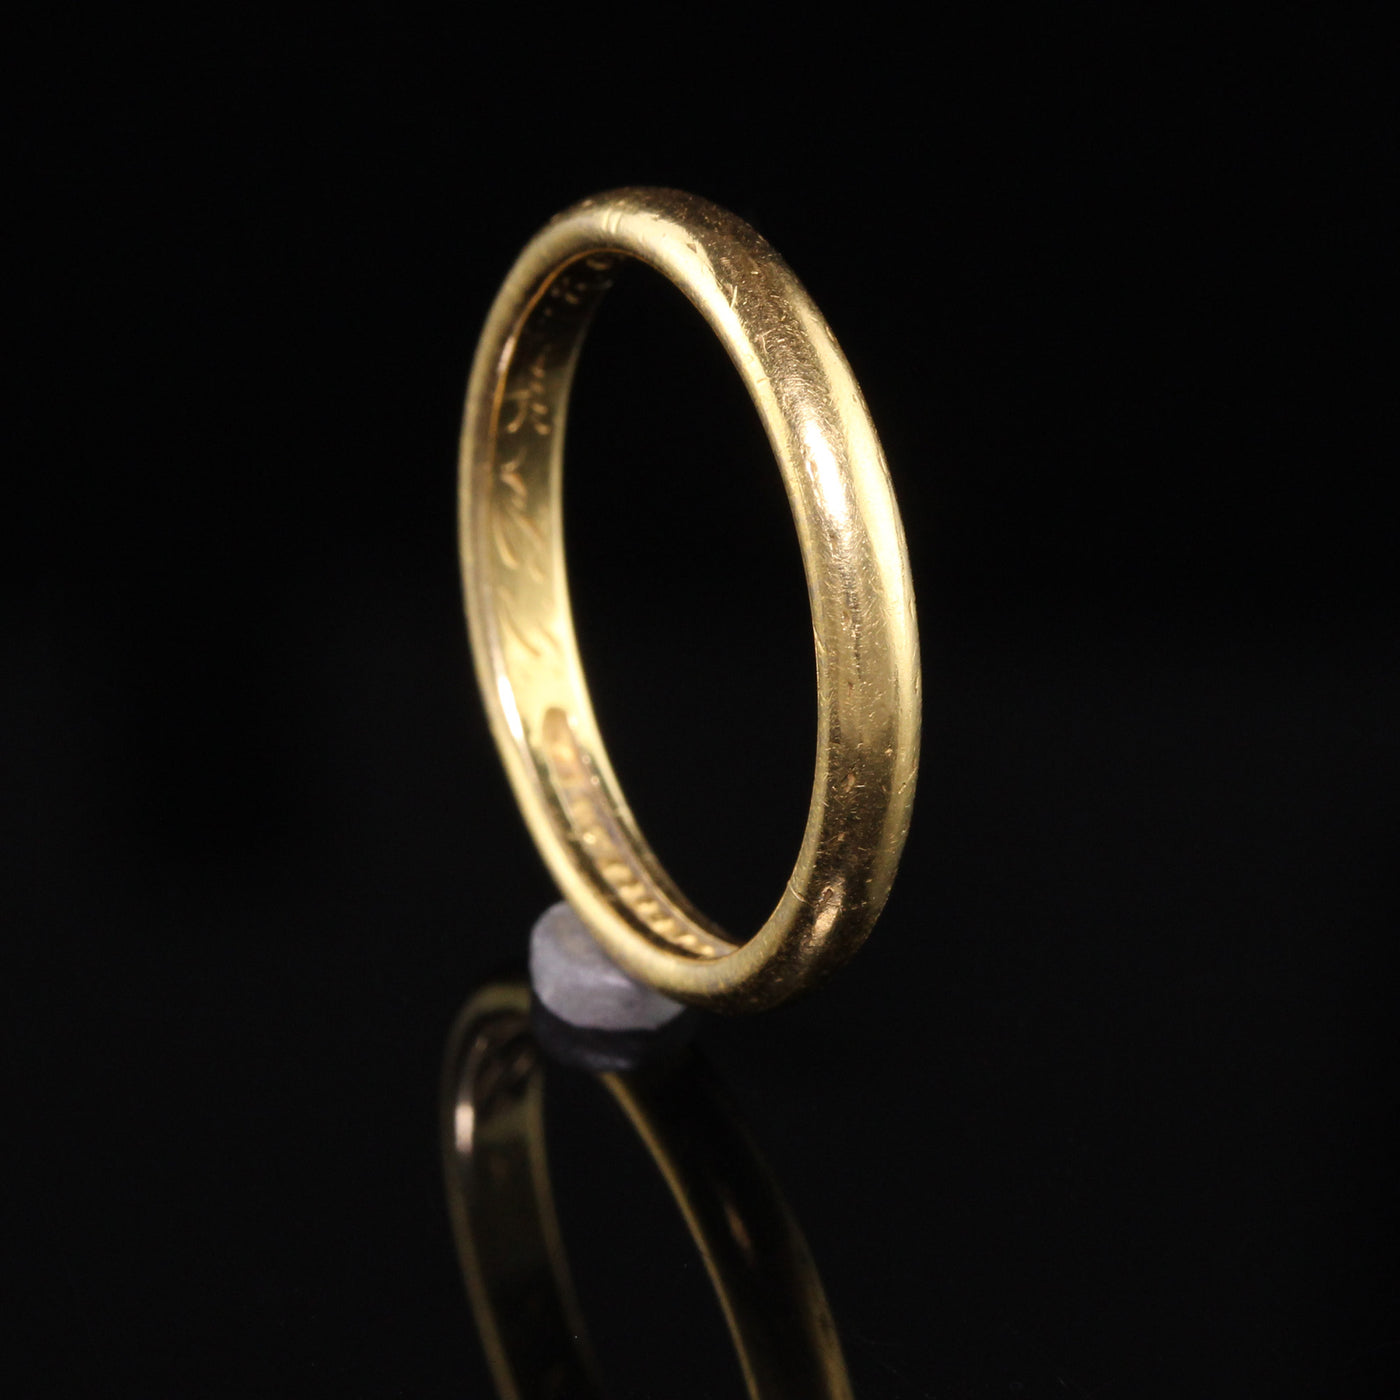 Antique Art Deco PEACOCK 22K Yellow Gold Engraved Classic Wedding Band - Size 10 1/2